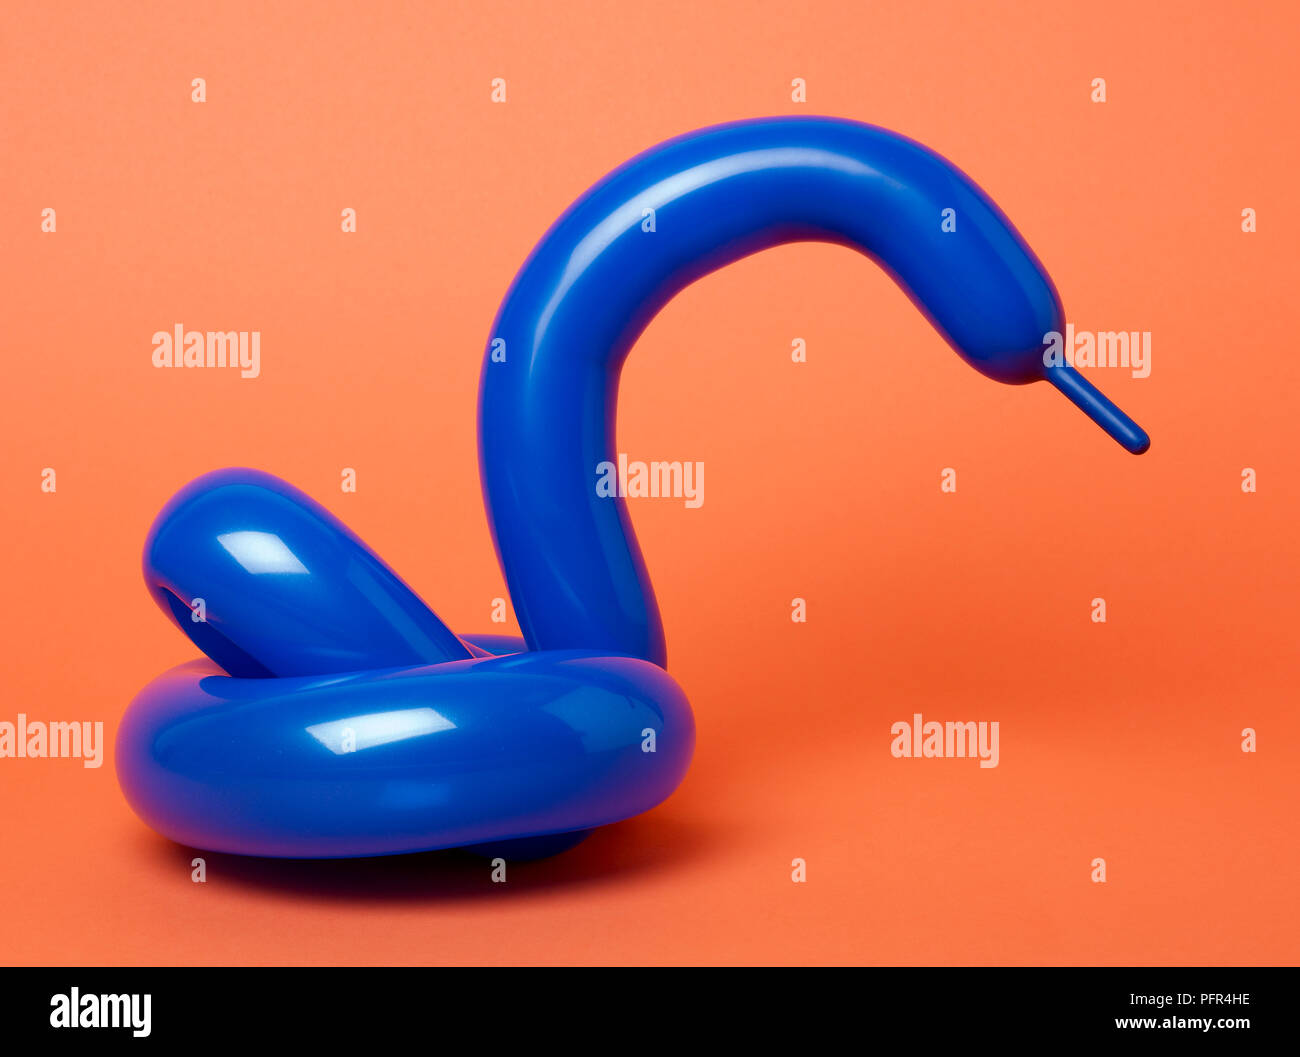 Blue balloon swan on red background Stock Photo